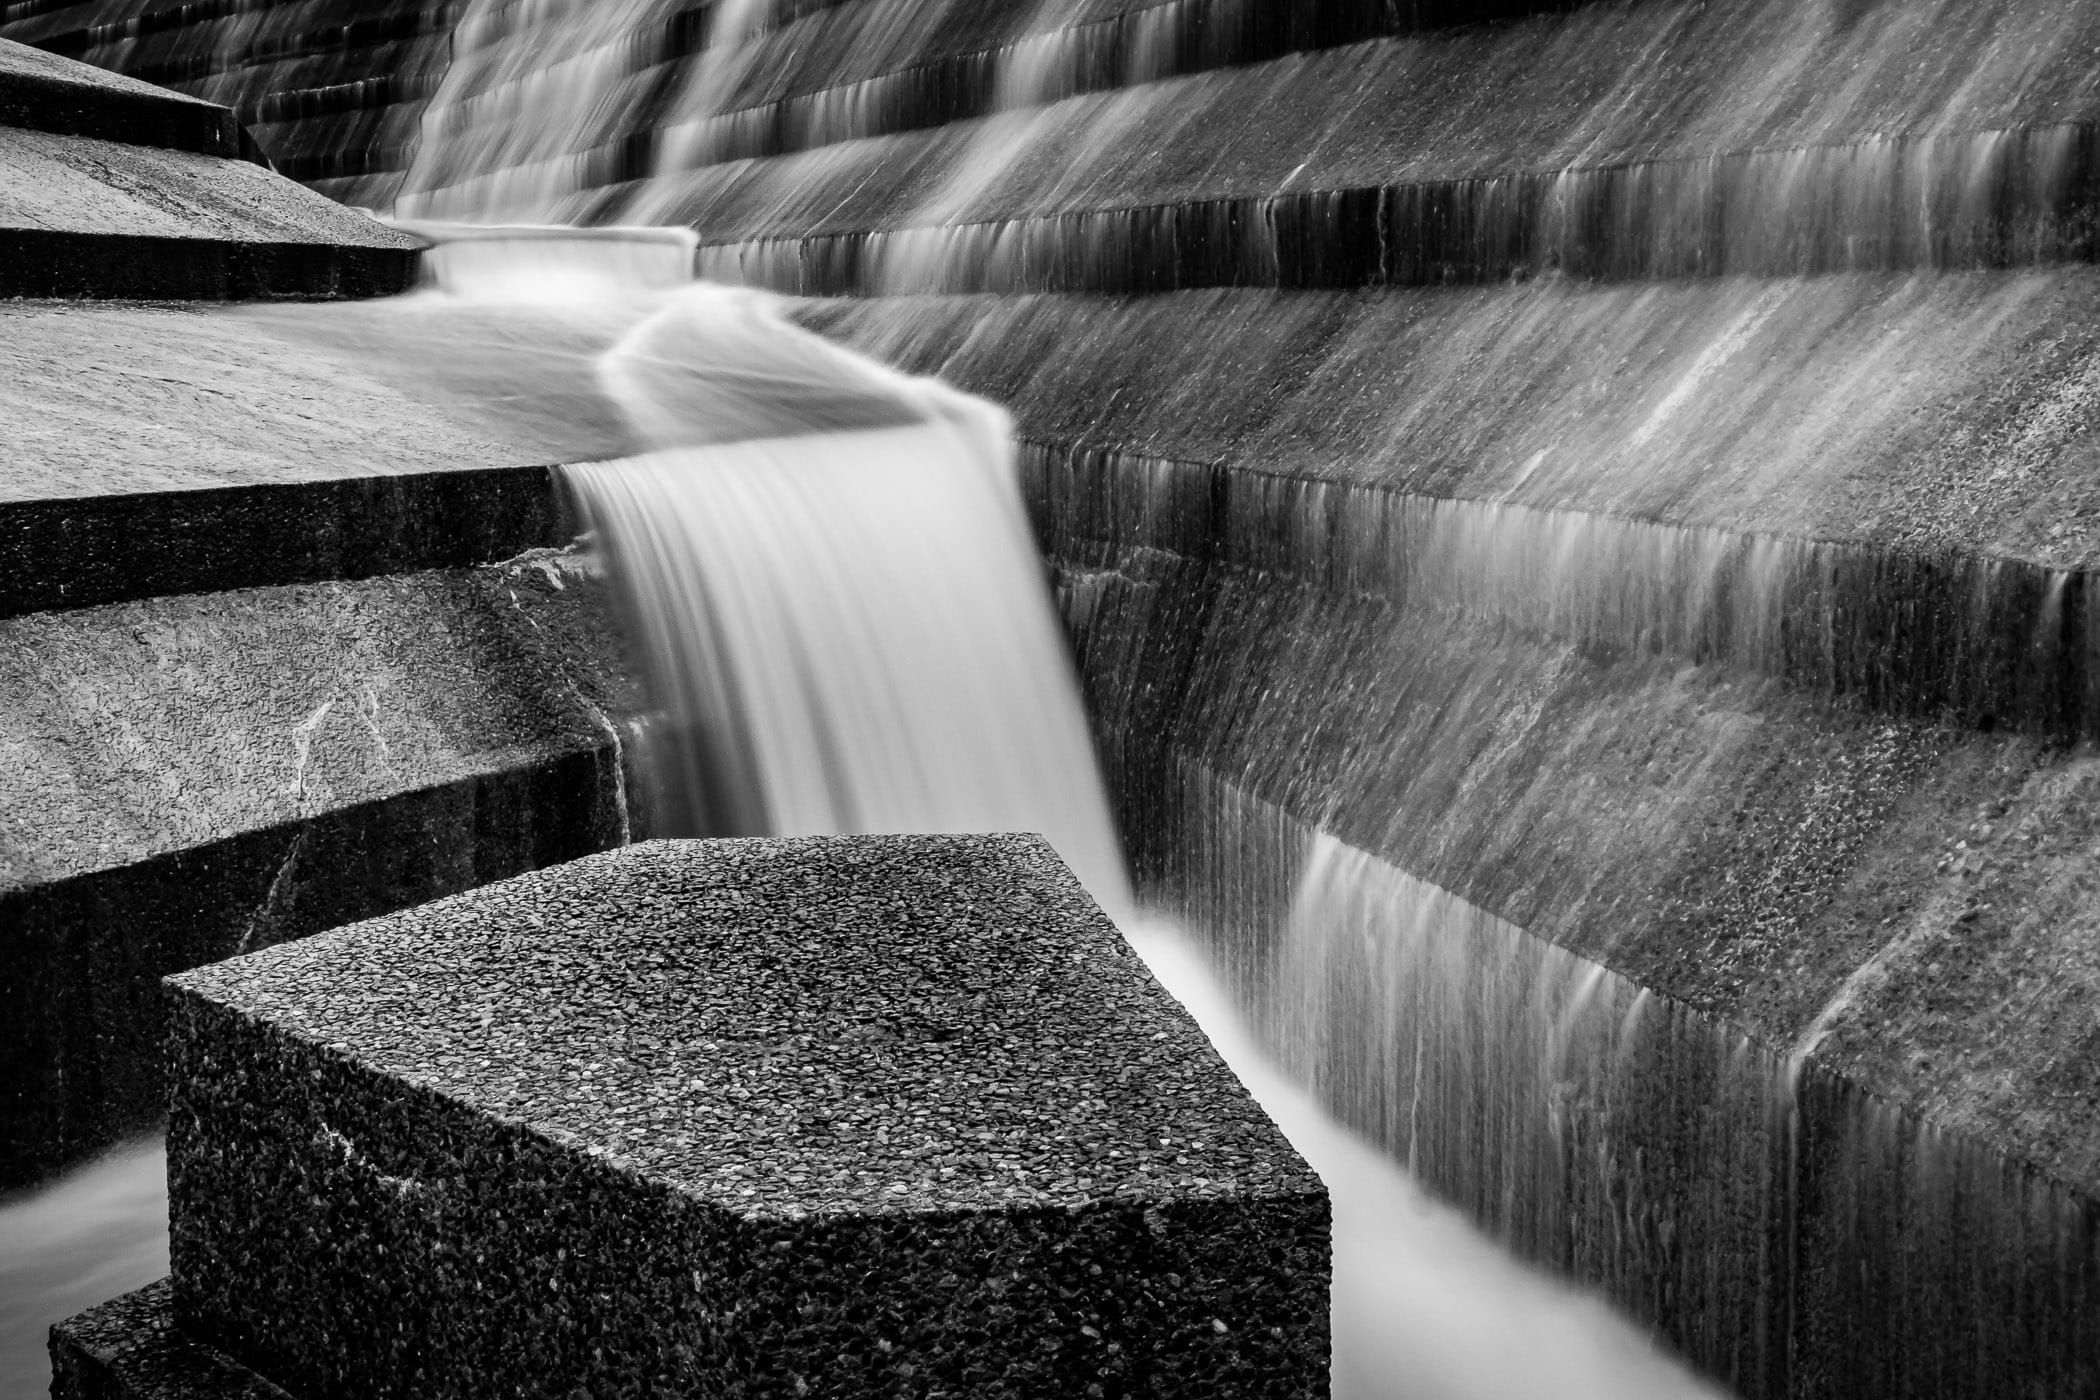 Water cascades over concrete aggregate blocks in the Active Pool at the Philip Johnson-designed Fort Worth Water Gardens in the south end of Downtown Fort Worth, Texas.